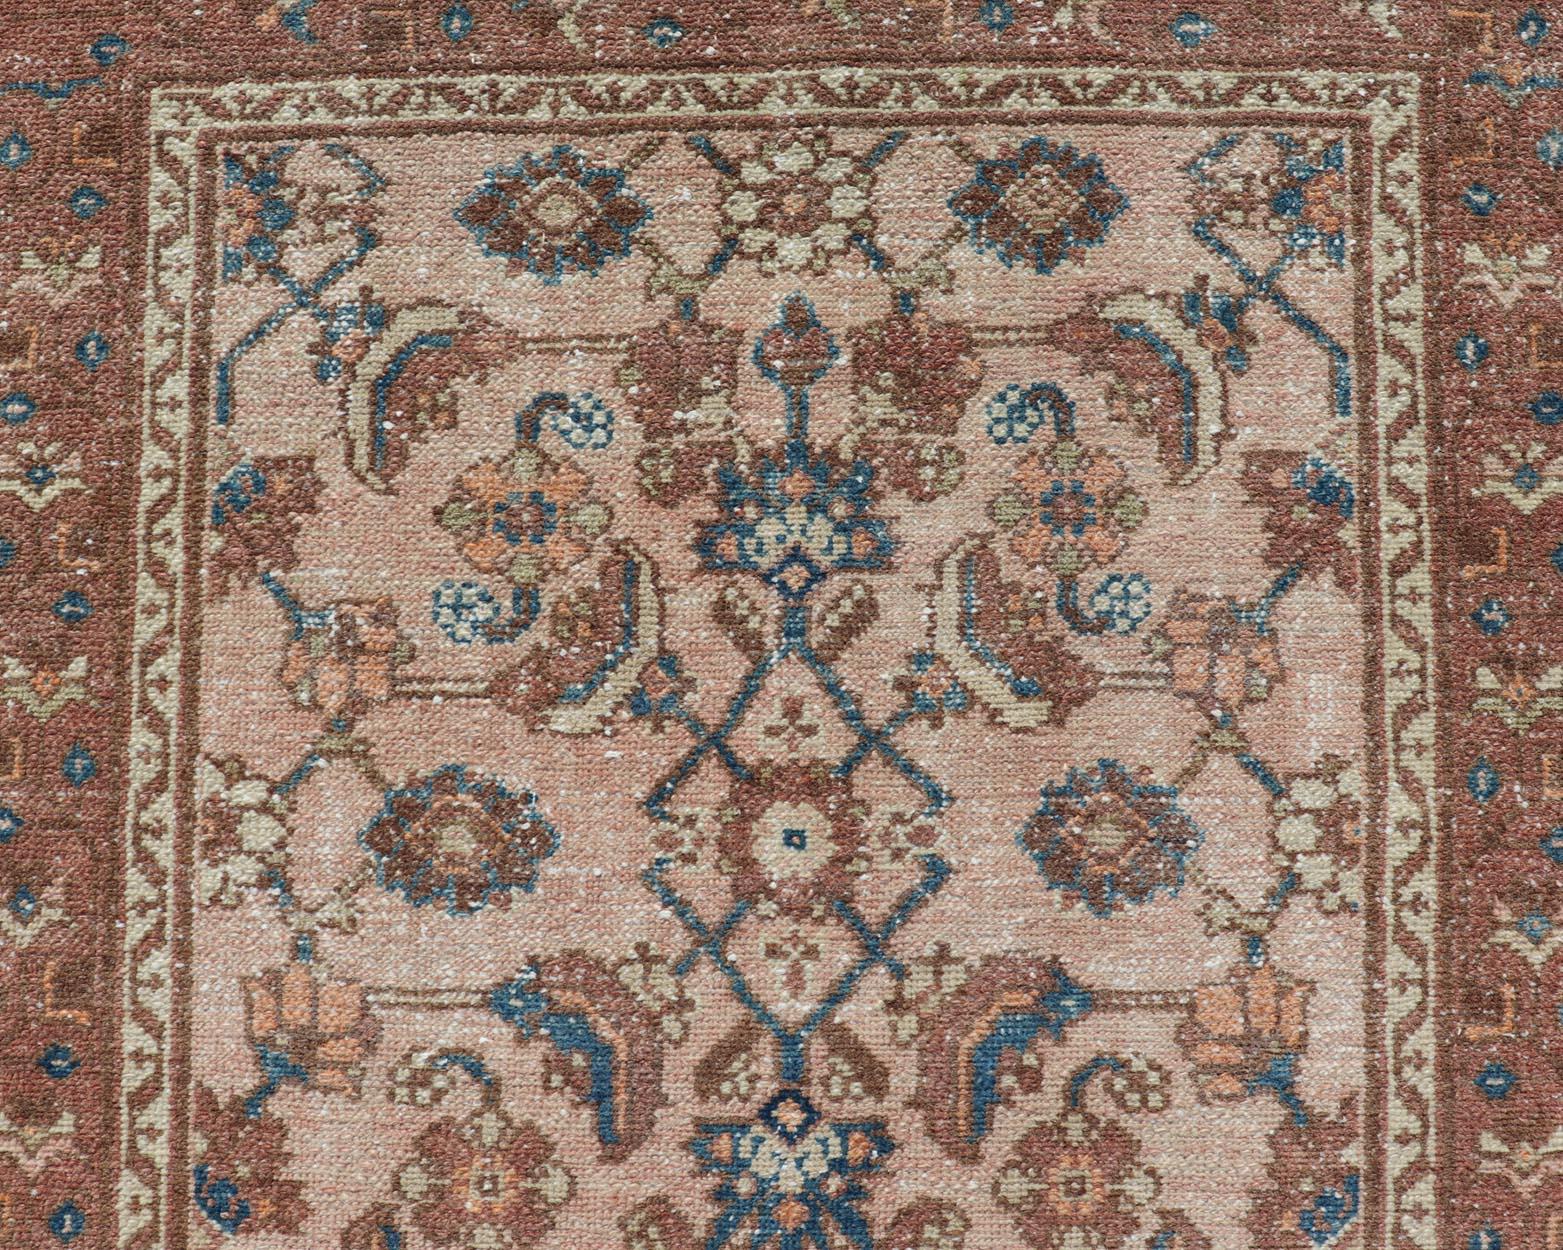 Measures: 3'0 x 5'8 
Antique Persian Hamadan Rug in Wool with All-Over Sub-Geometric Design. Keivan Woven Arts; rug EN-13665, country of origin / type: Iran / Hamadan, circa 1920.

This antique Persian Hamadan rug has been hand-knotted in wool and